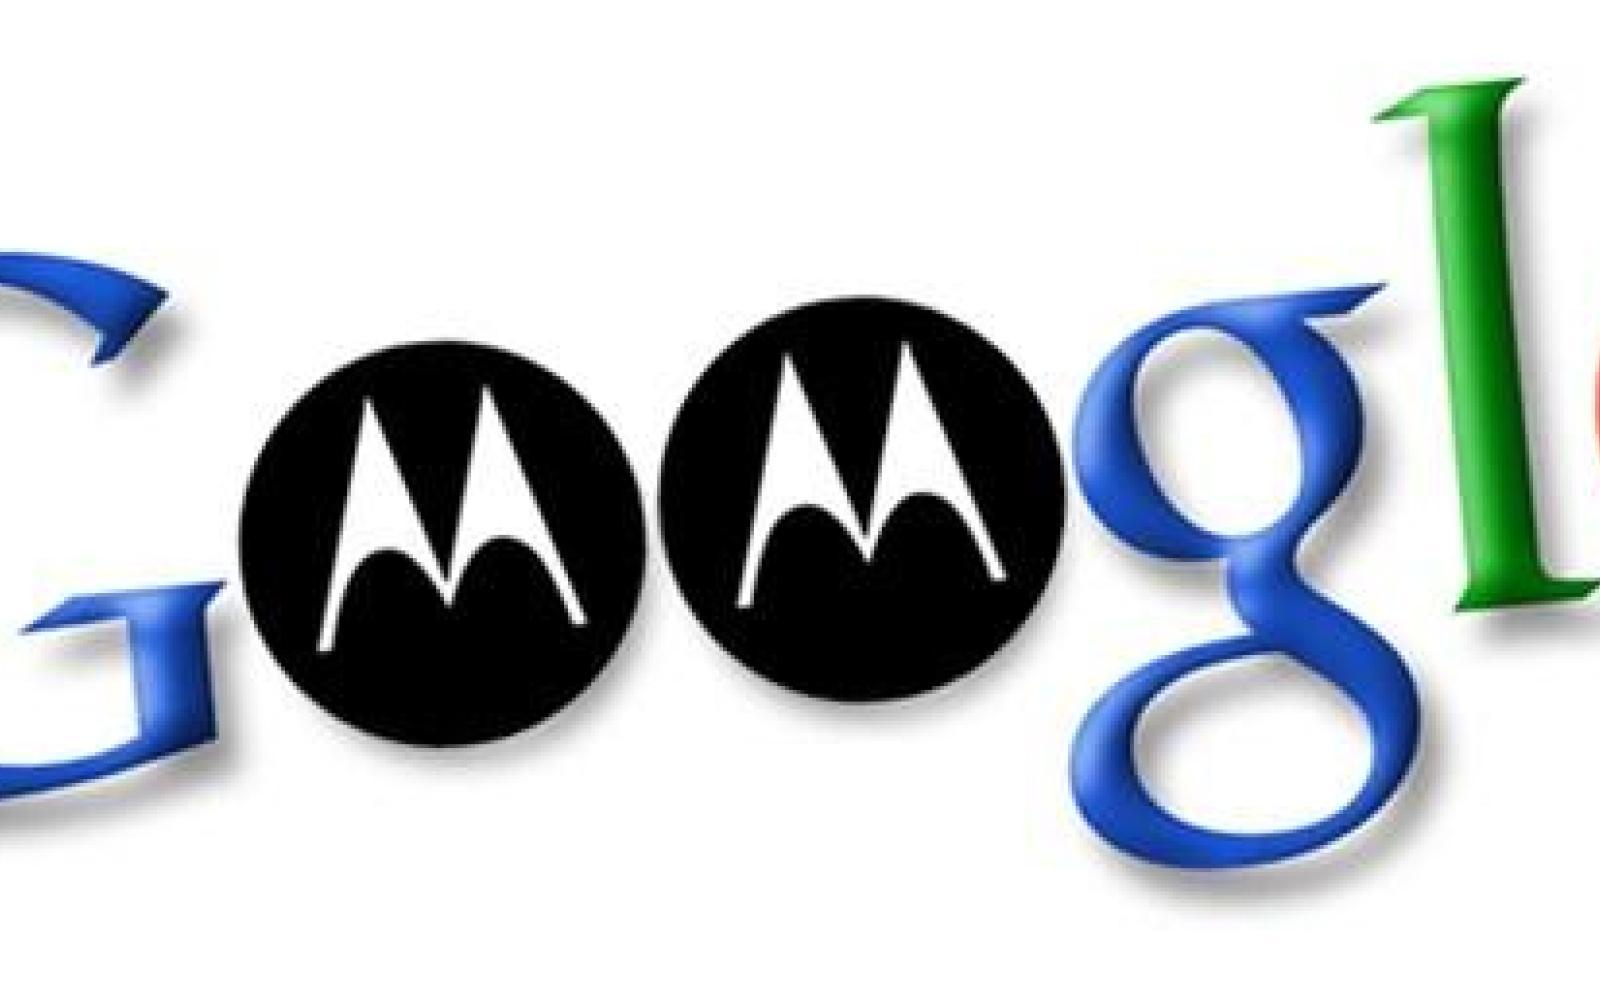 New Motorola Mobility Logo - Supercharging Android: Google snaps up Motorola Mobility for $12.5